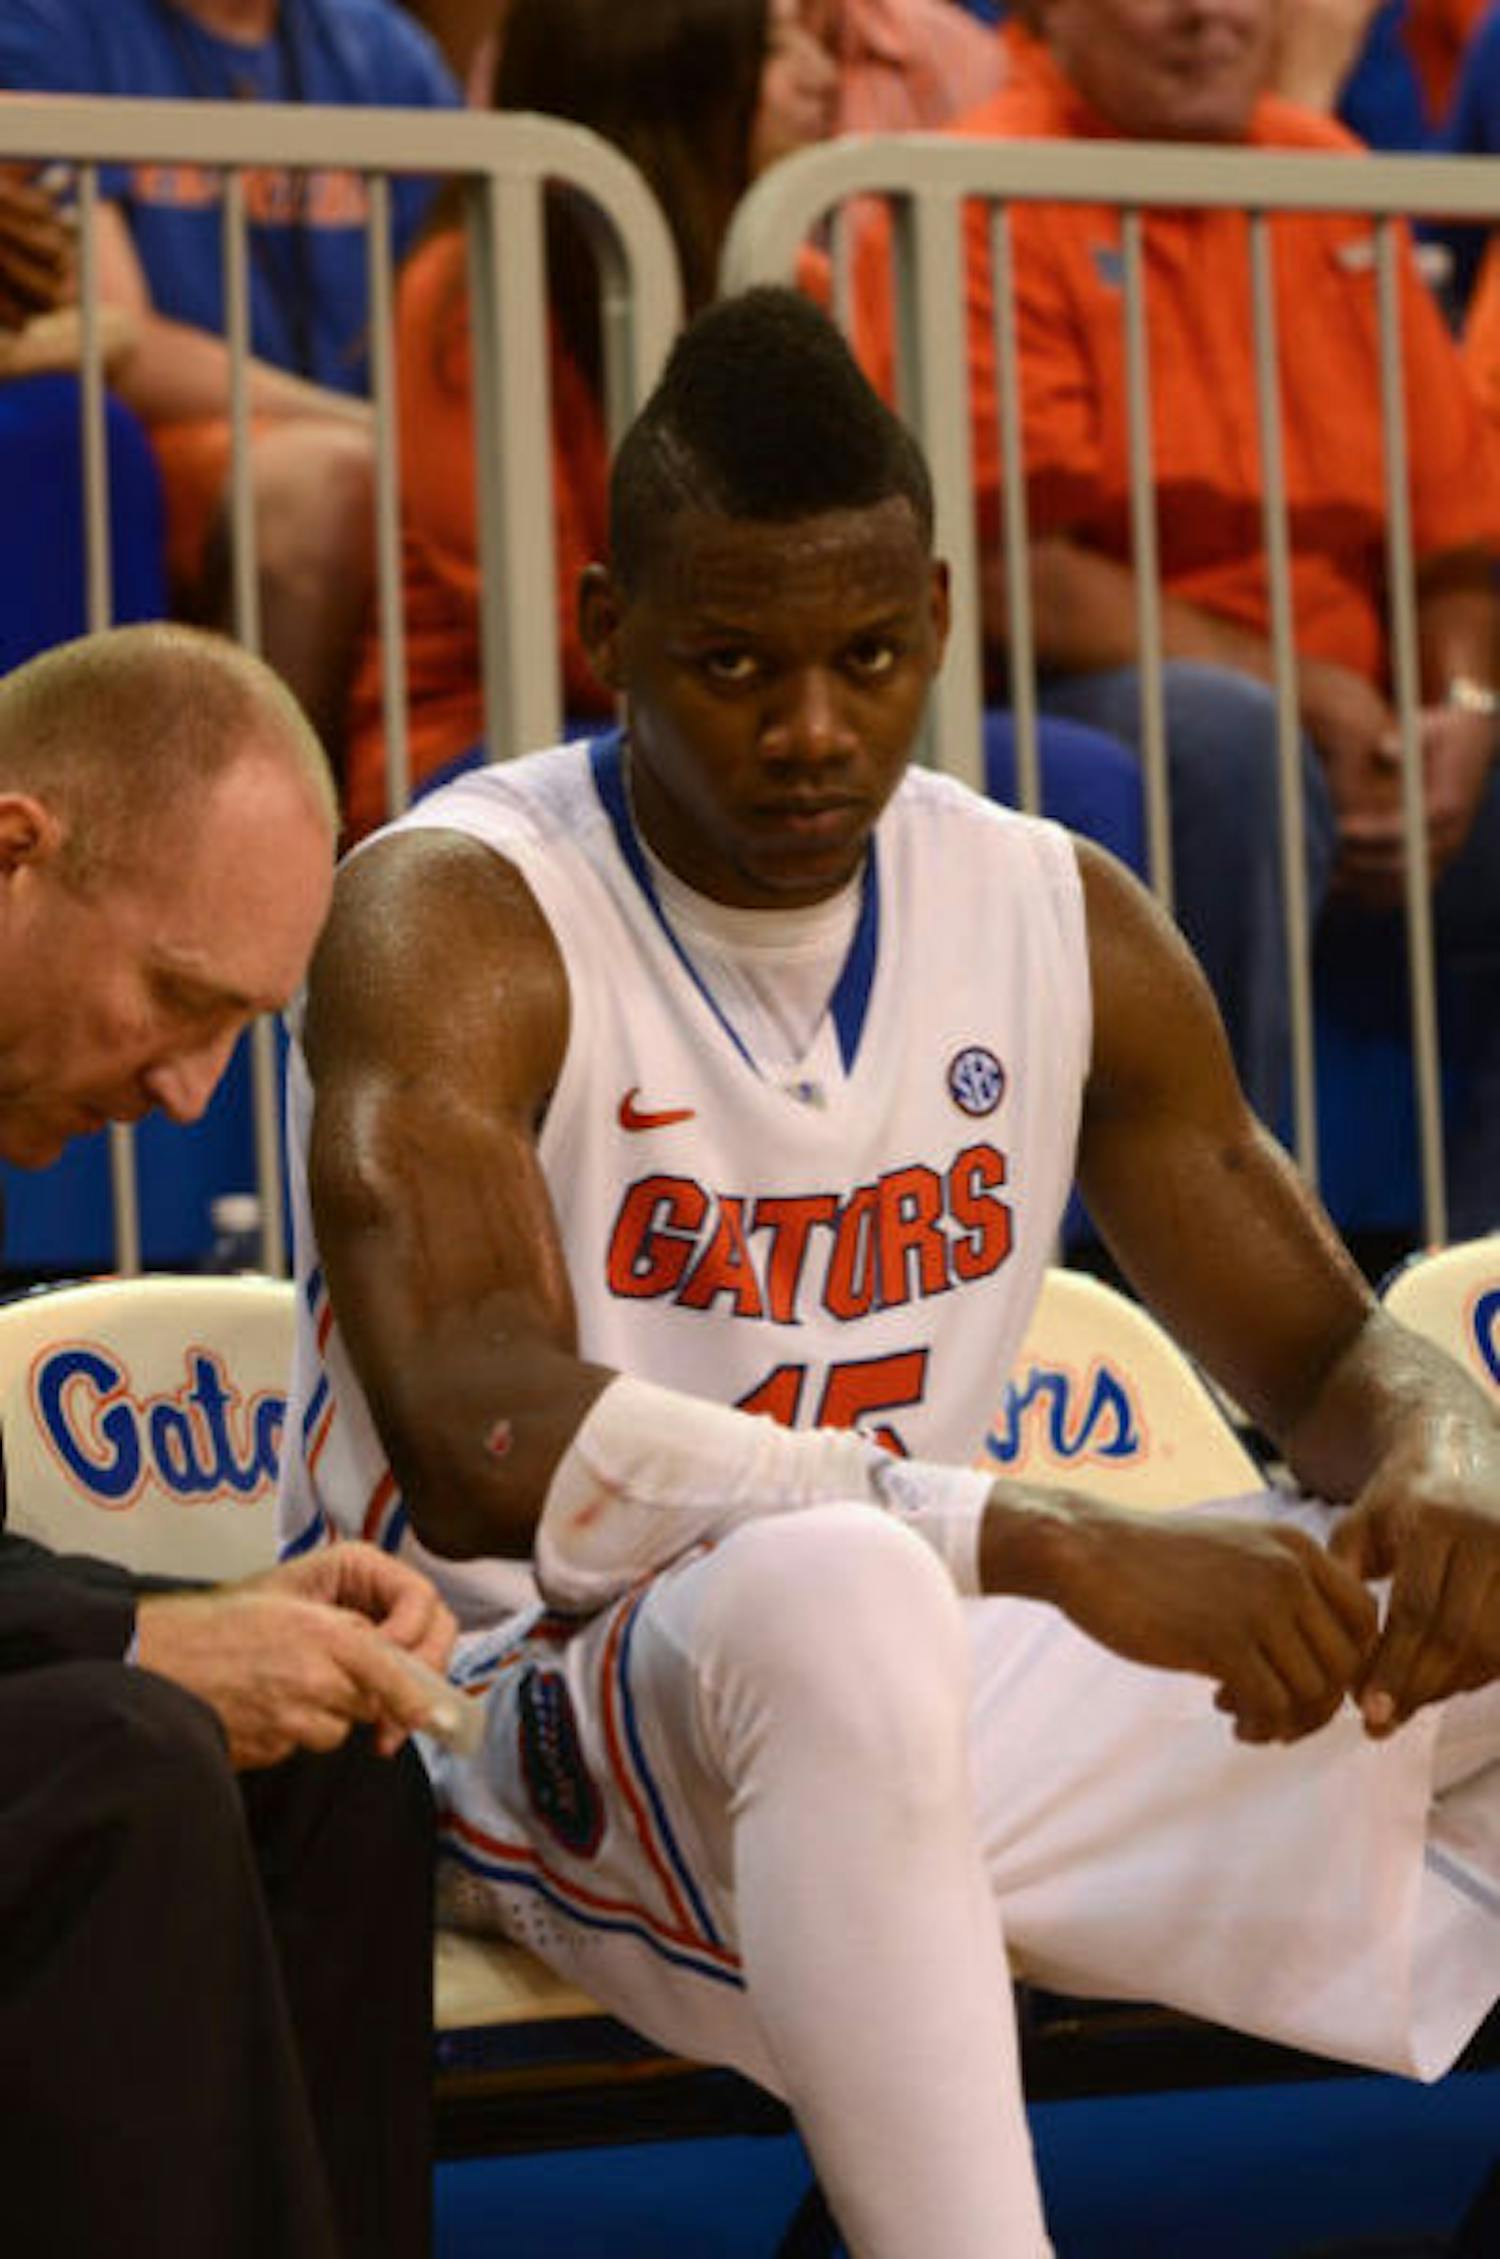 Senior forward Will Yeguete sits on the bench during No. 19 Florida's 67-61 win against No. 13 Kansas on Tuesday night in the O'Connell Center.